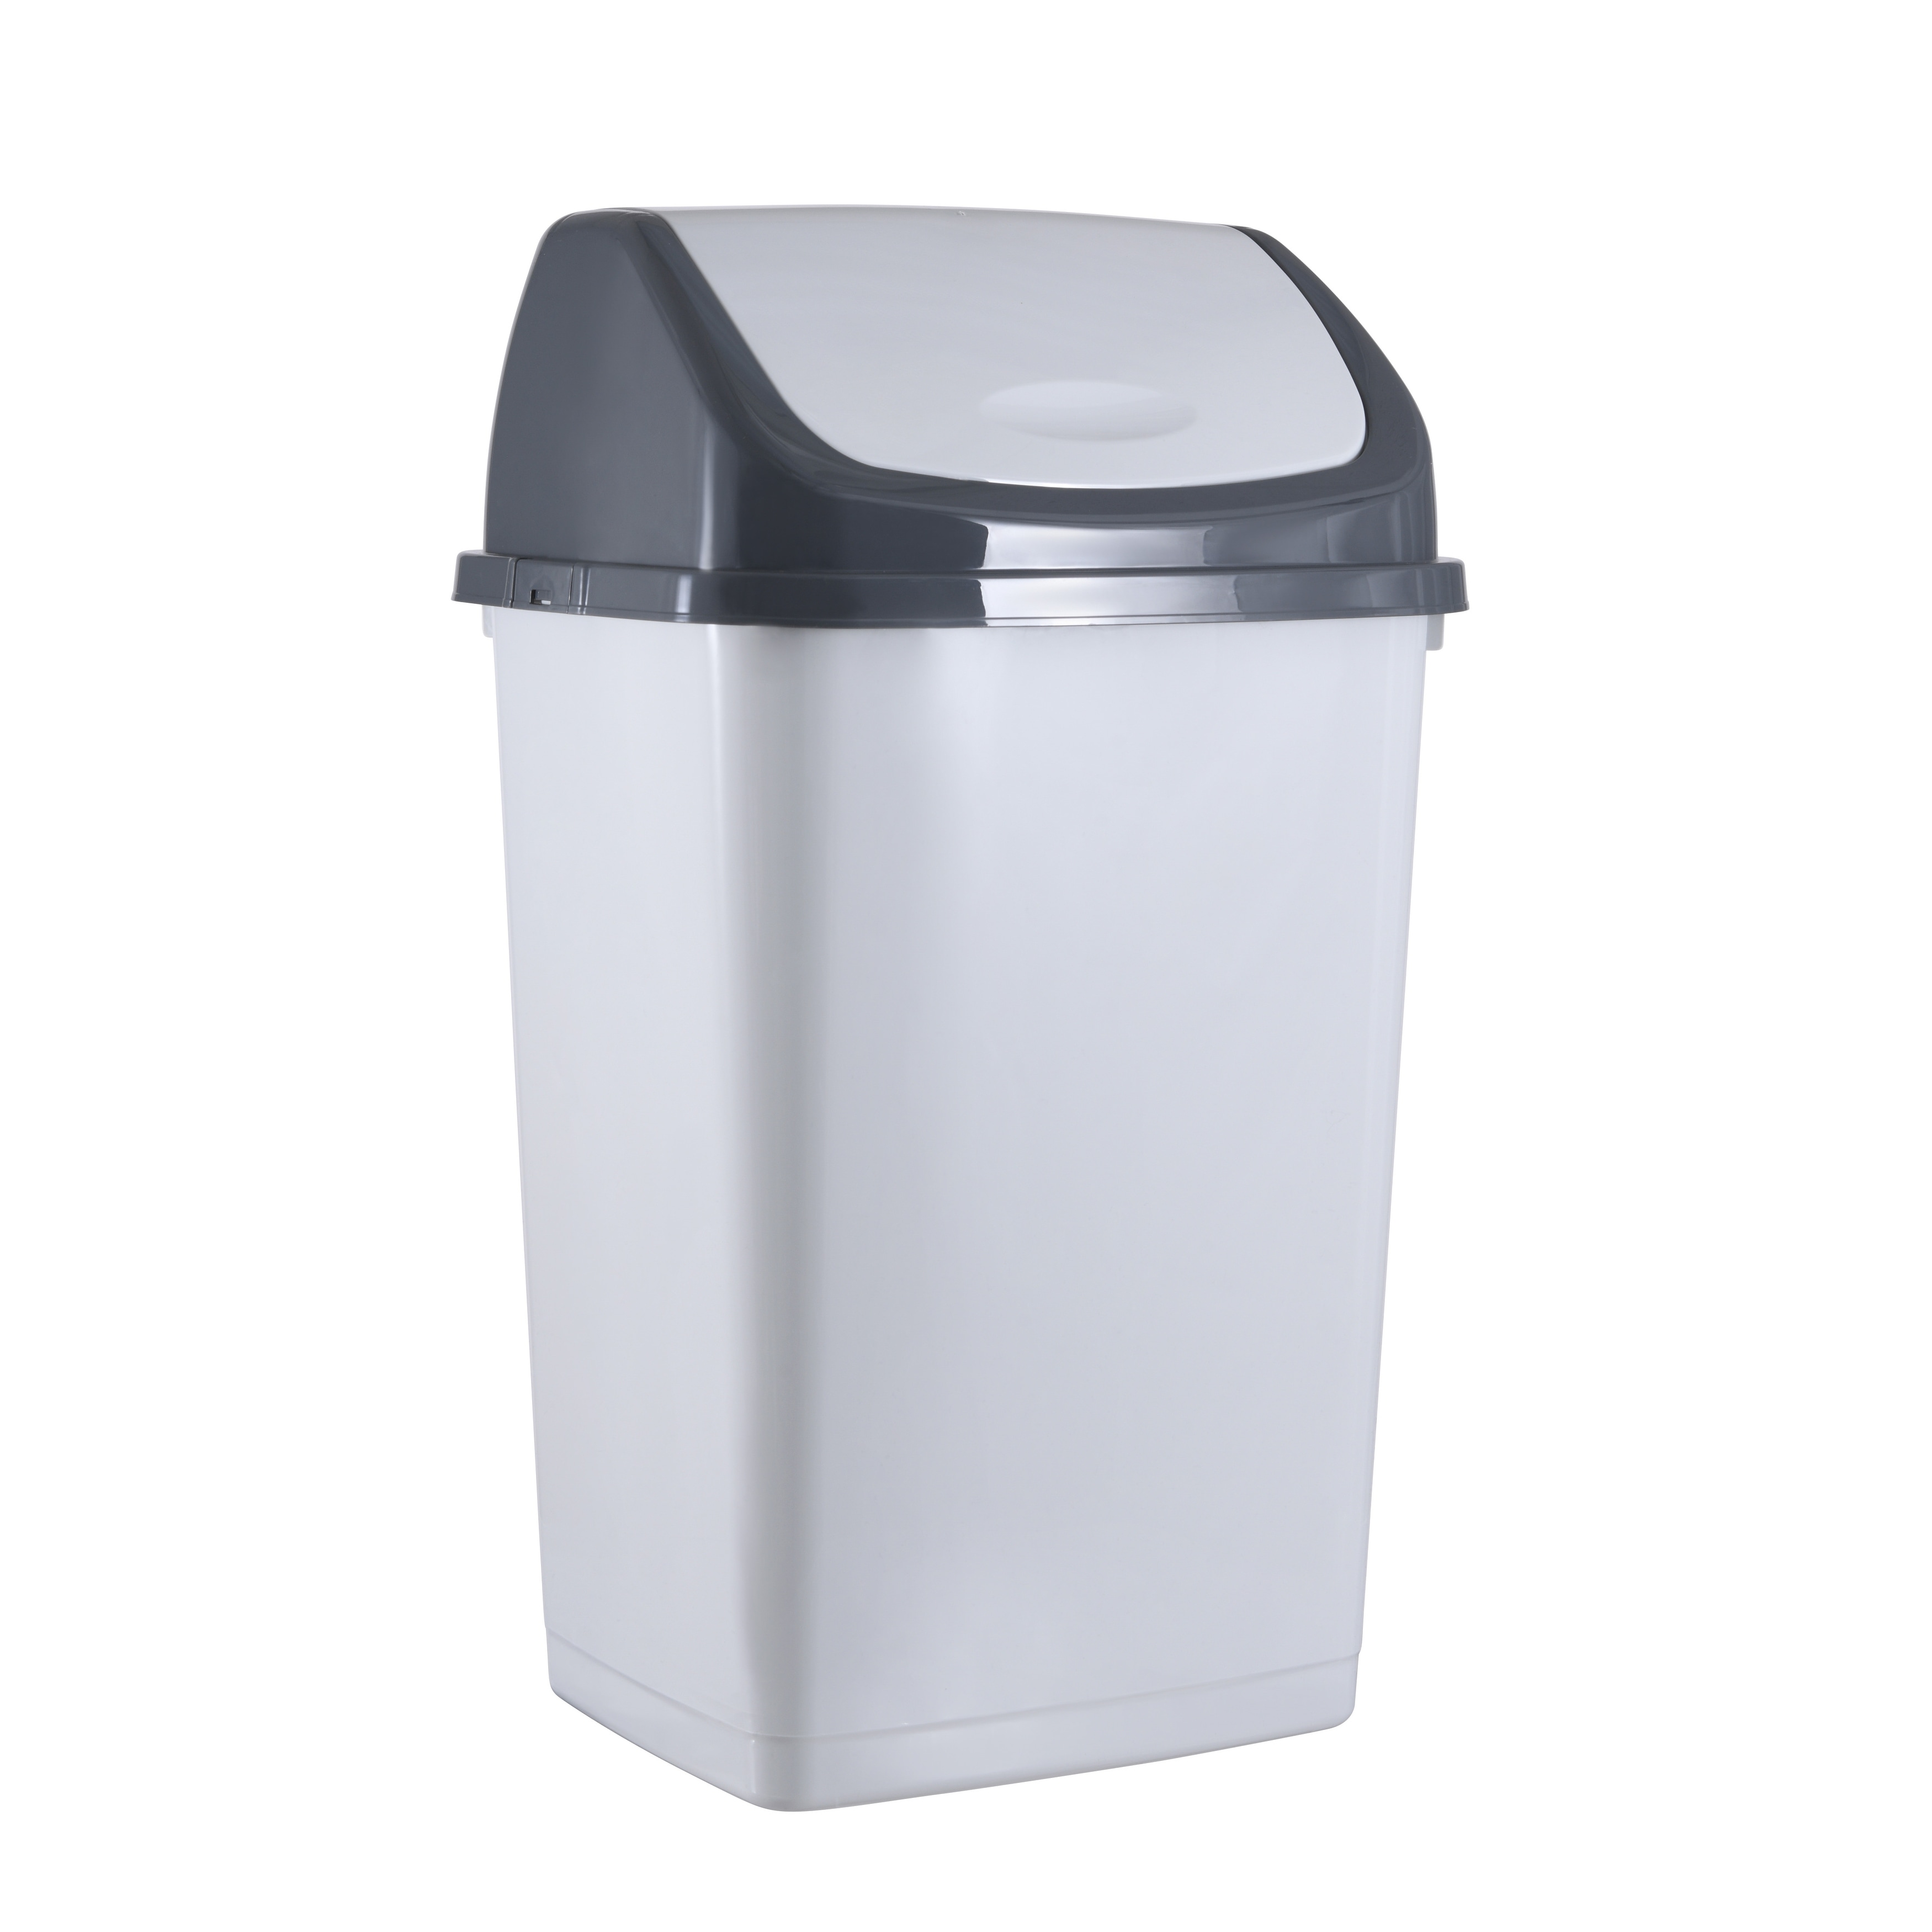 https://ak1.ostkcdn.com/images/products/is/images/direct/90581c3b4e68814c84df1fe97aaba3273002dcc5/Superio-13-gal-Swing-Top-Trash-Can.jpg